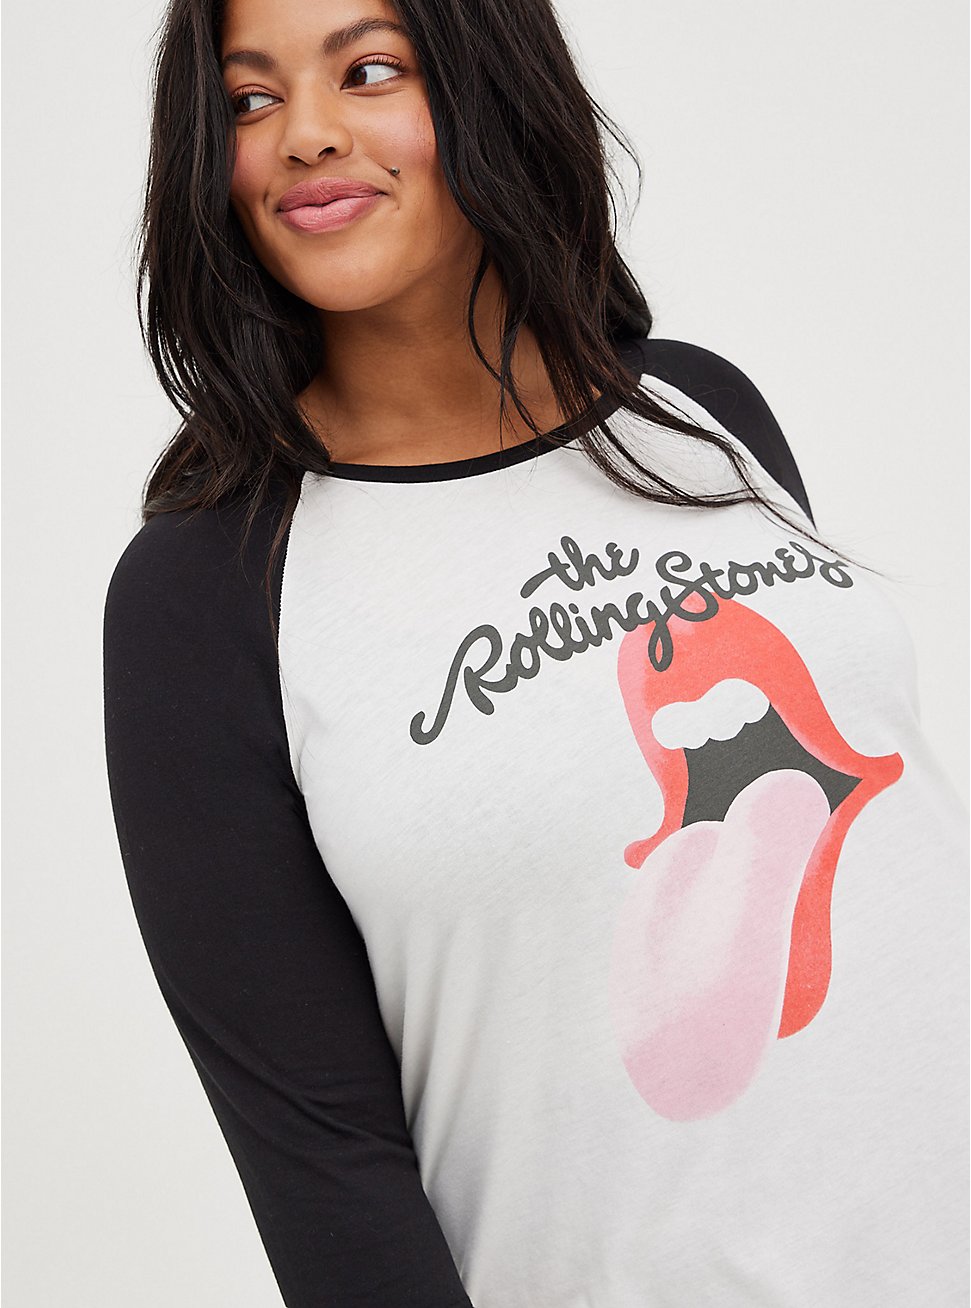 Classic Fit Raglan Tee - Rolling Stones Lips White, MARSHMALLOW, hi-res